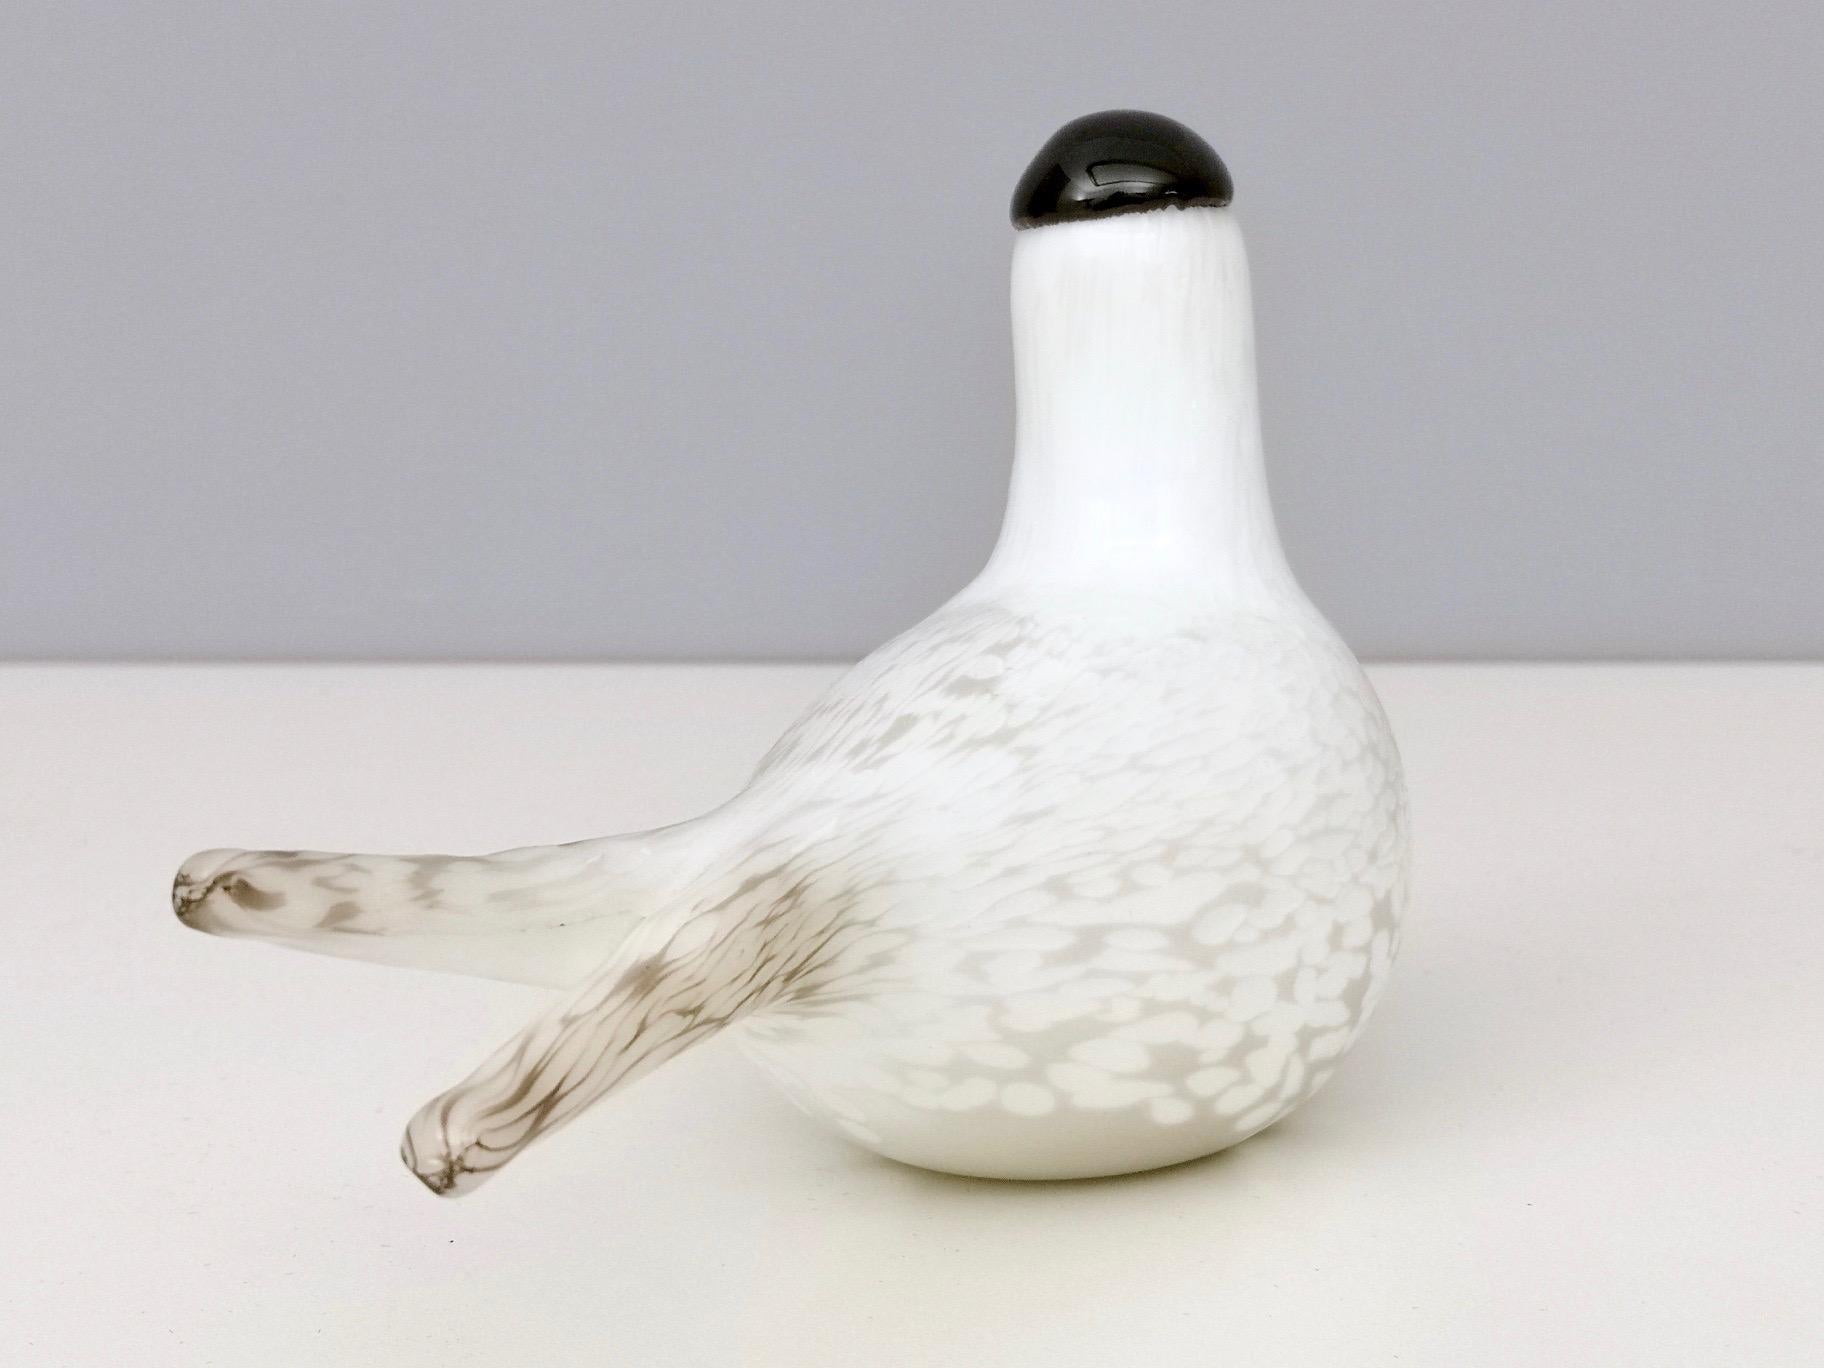 Contemporary Mounth-Blown Glass Artic Tern by Oiva Toikka for Ittala, Finland, 2000s